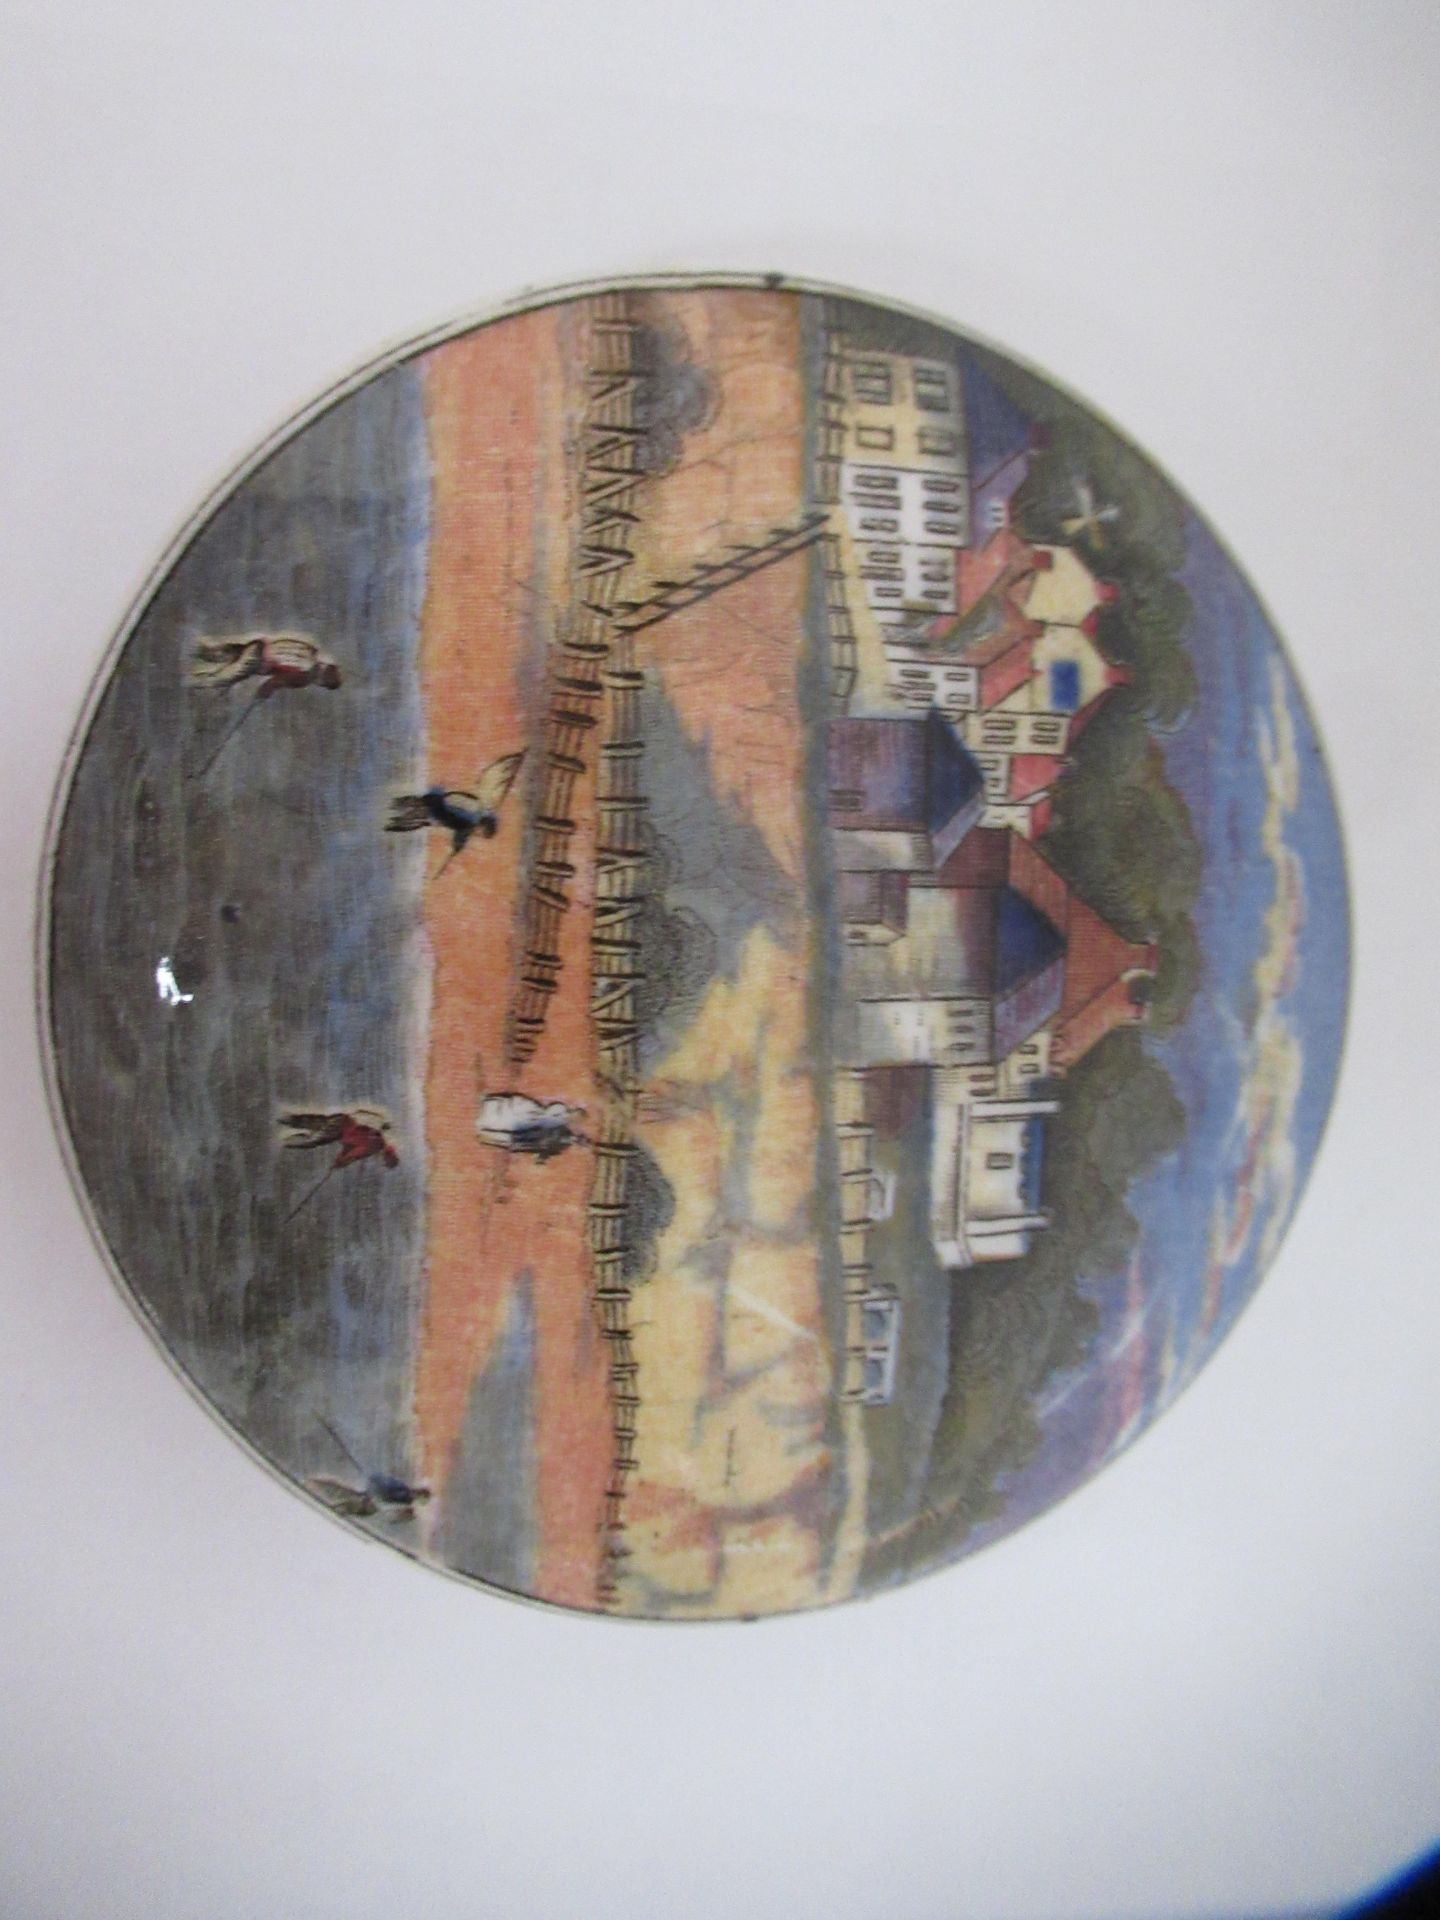 6x Prattware ceramic lids including 'Royal Harbour Ramsgate', 'Uncle Toby', and 'The Times' - Image 6 of 28